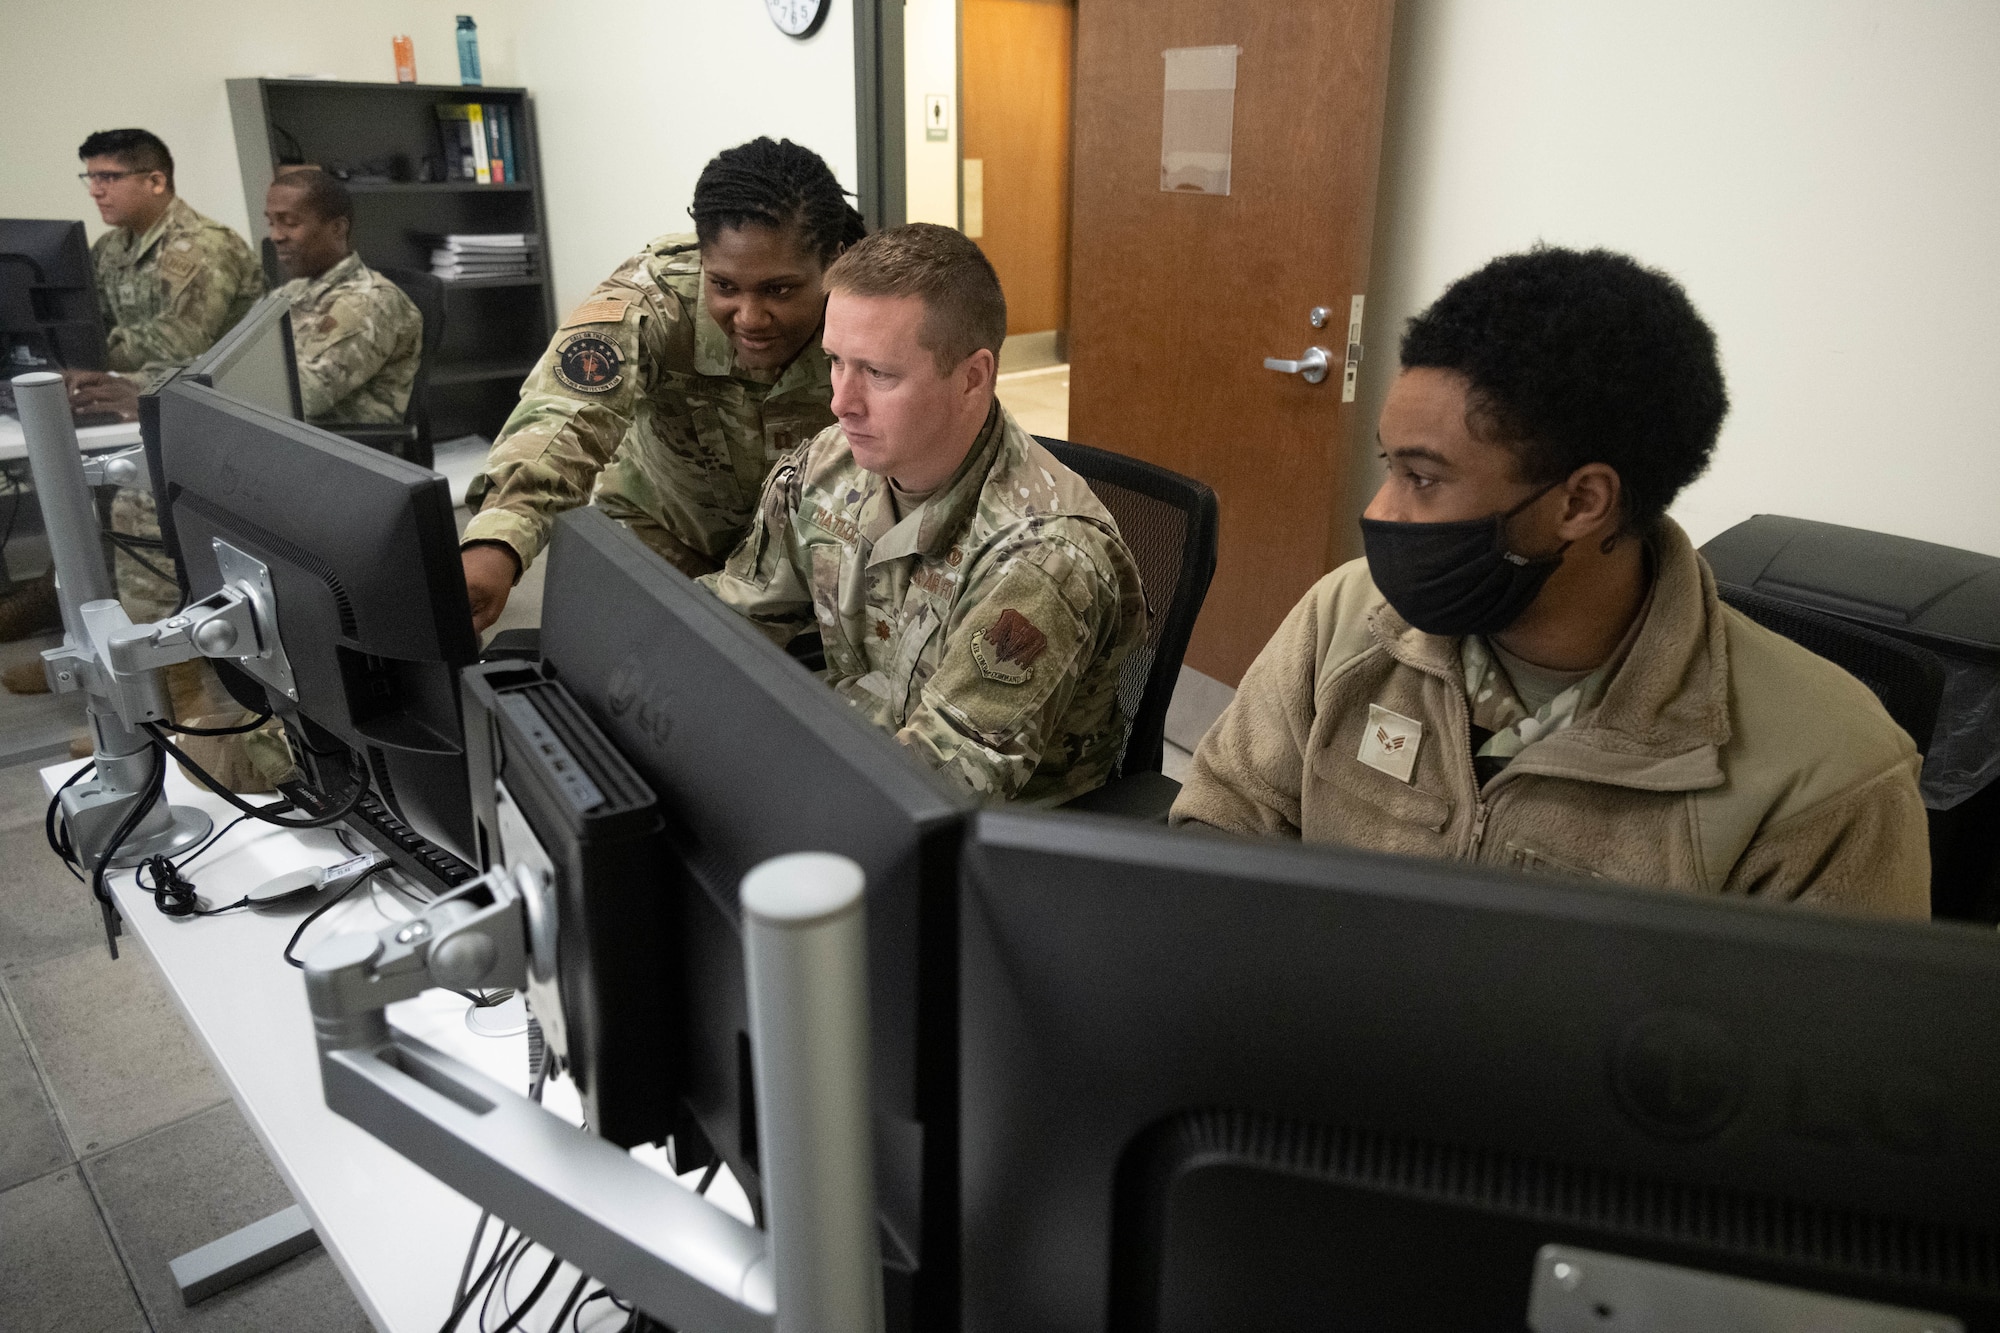 Airmen assigned to the 275th Cyberspace Operations Squadron work at a computer terminal at Warfield Air National Guard Base at Martin State Airport, Middle River, Md., on January 10, 2023.